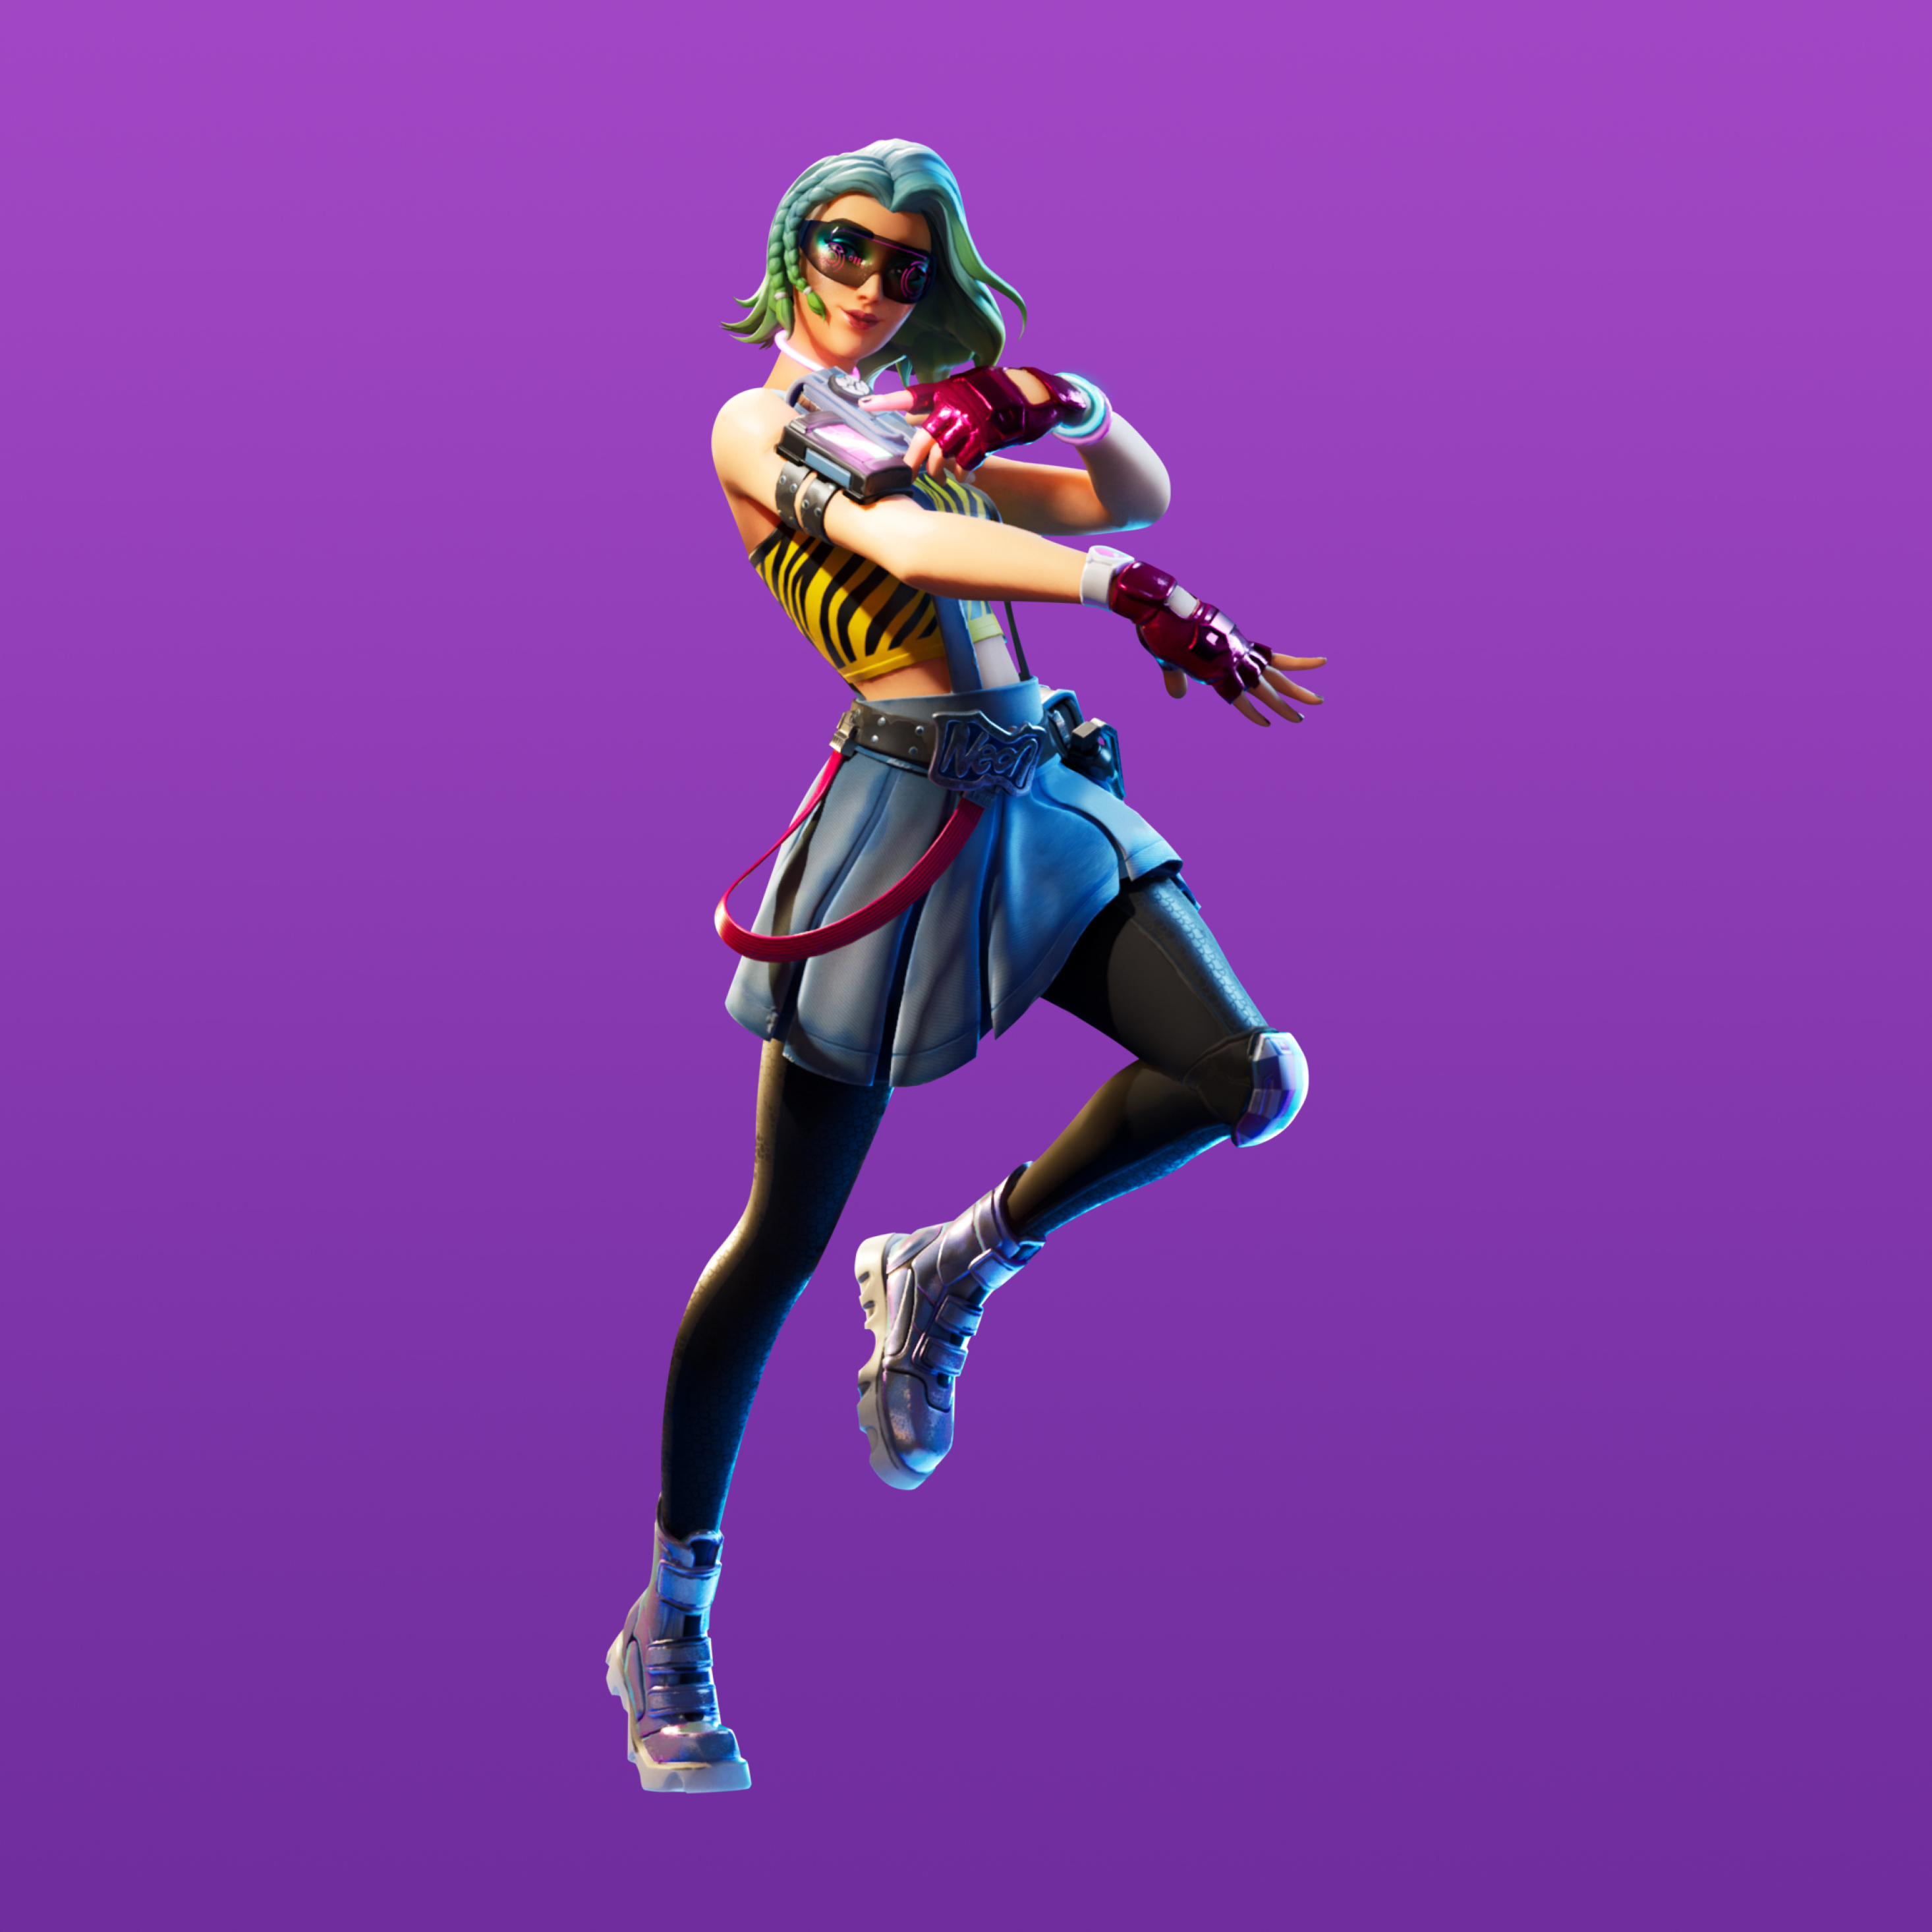 Cameo In Fortnite Chapter 2 (2932x2932) Resolution Wallpaper.